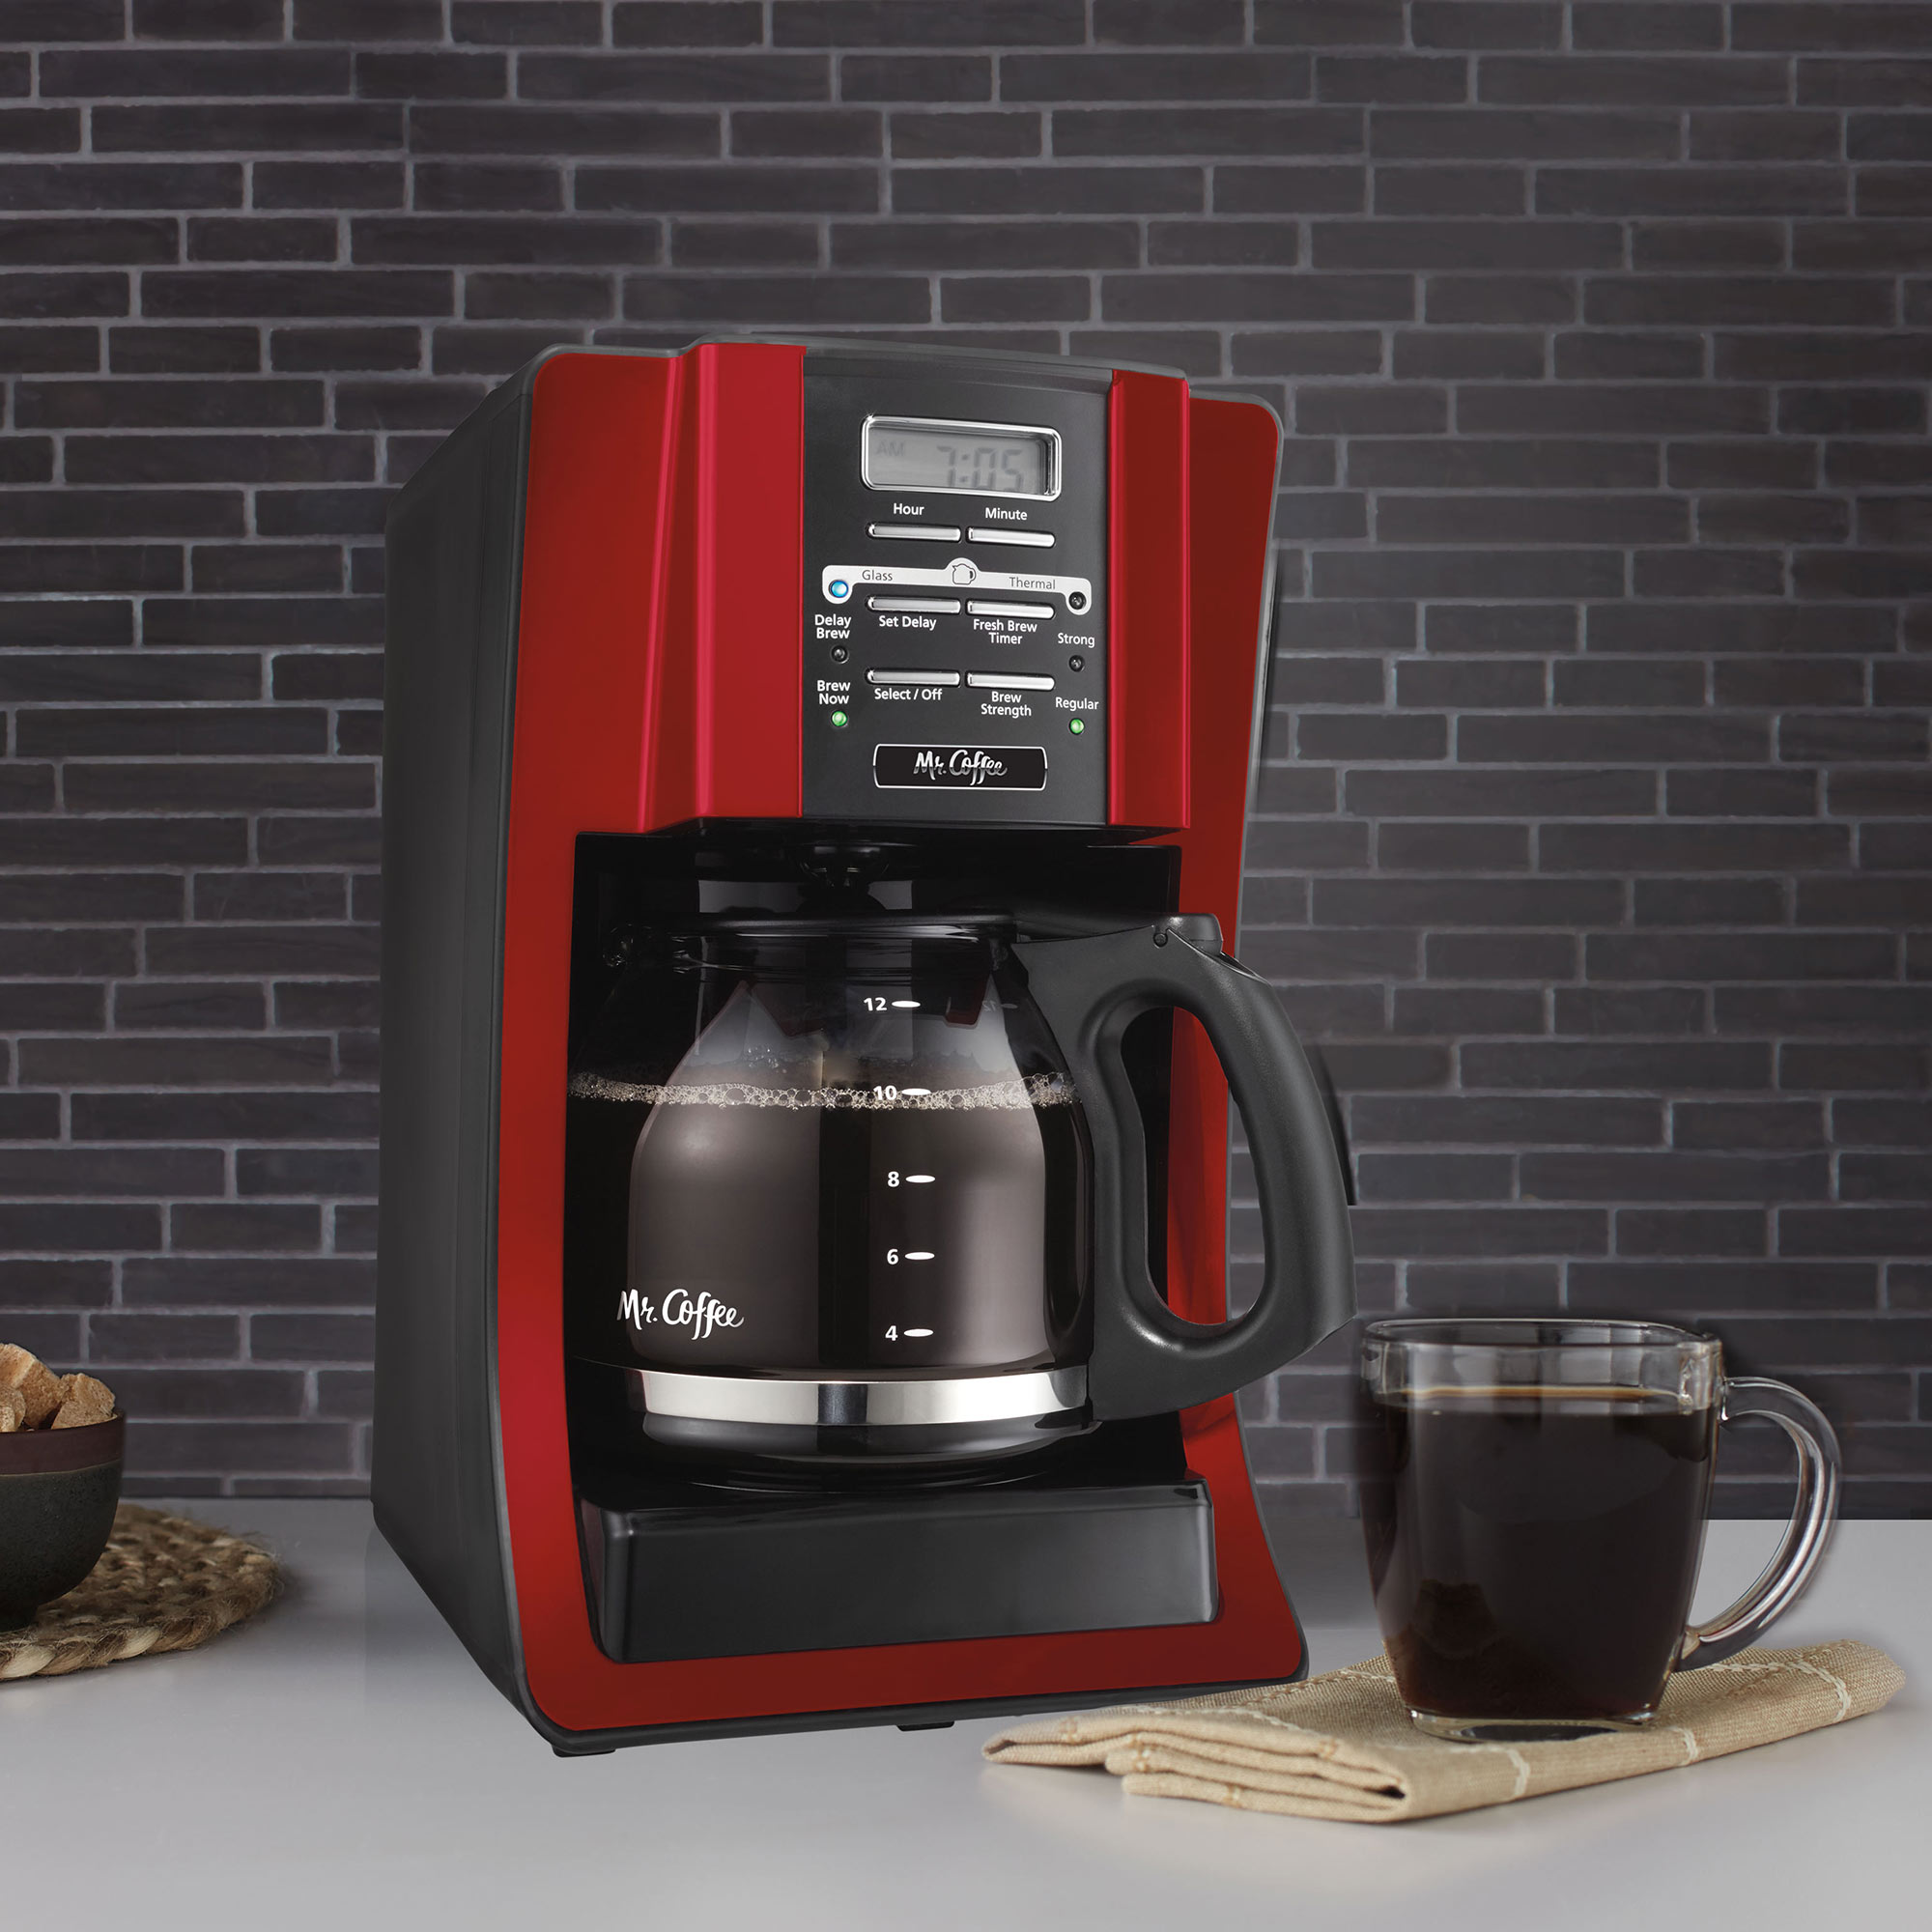 Mr. Coffee BVMCSJX36RB Advanced 12 Cup Programmable Digital Coffee Maker, Red - image 3 of 3